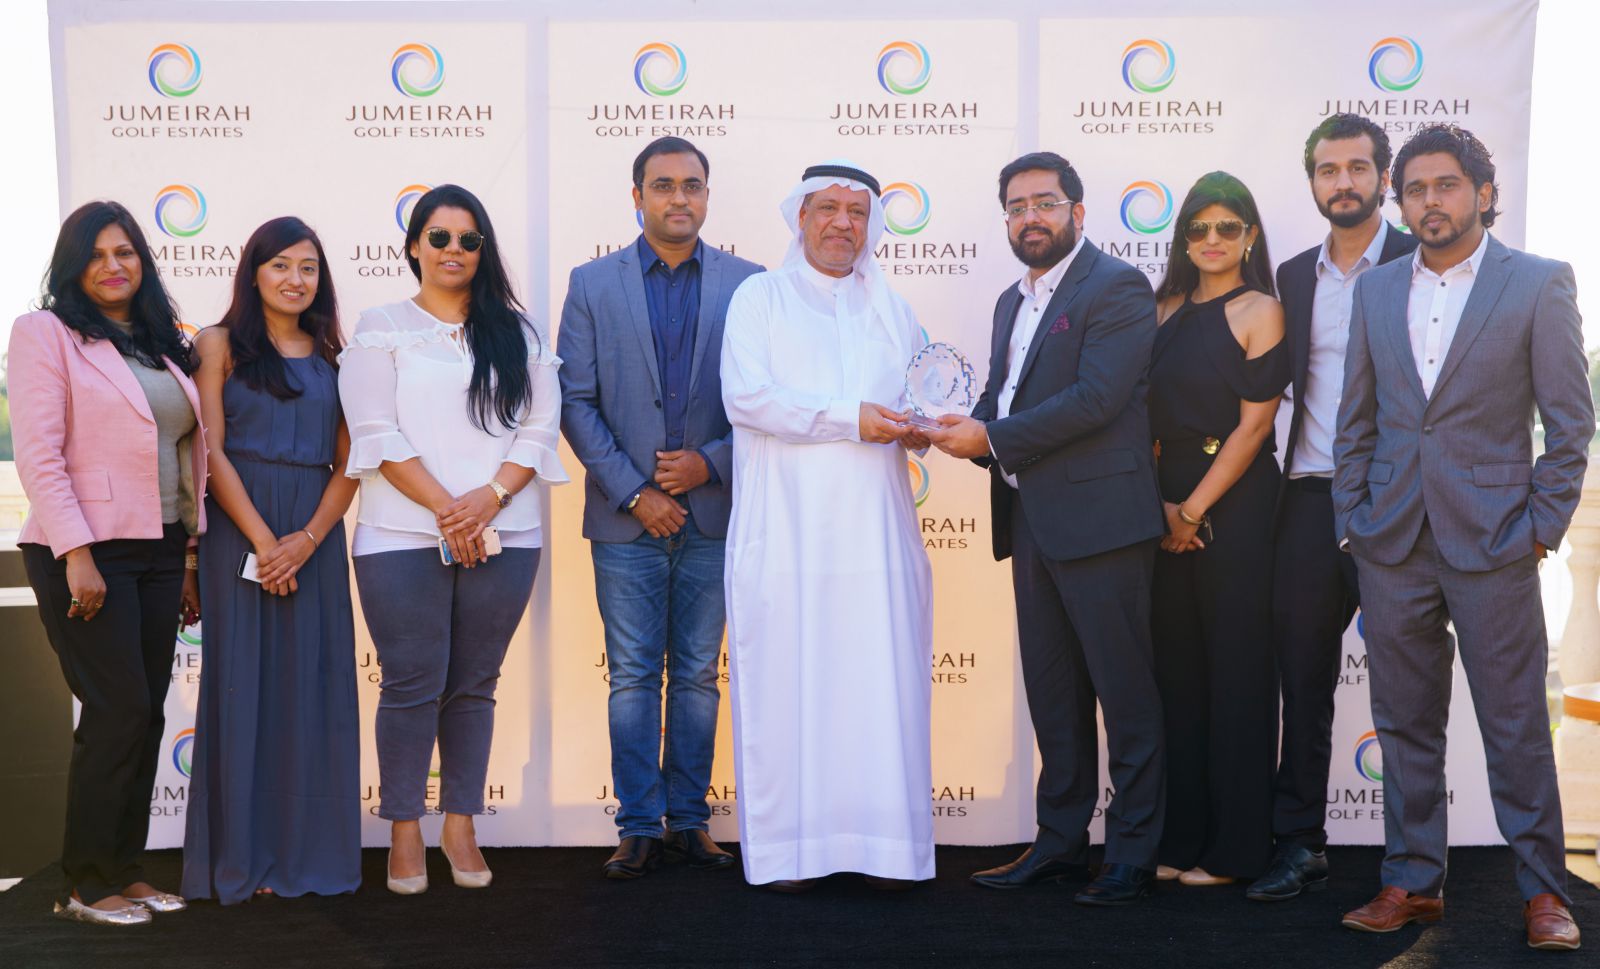 Jumeirah Golf Estates Celebrates 40% Sales Increase in 2017 at Annual Brokers Awards Event